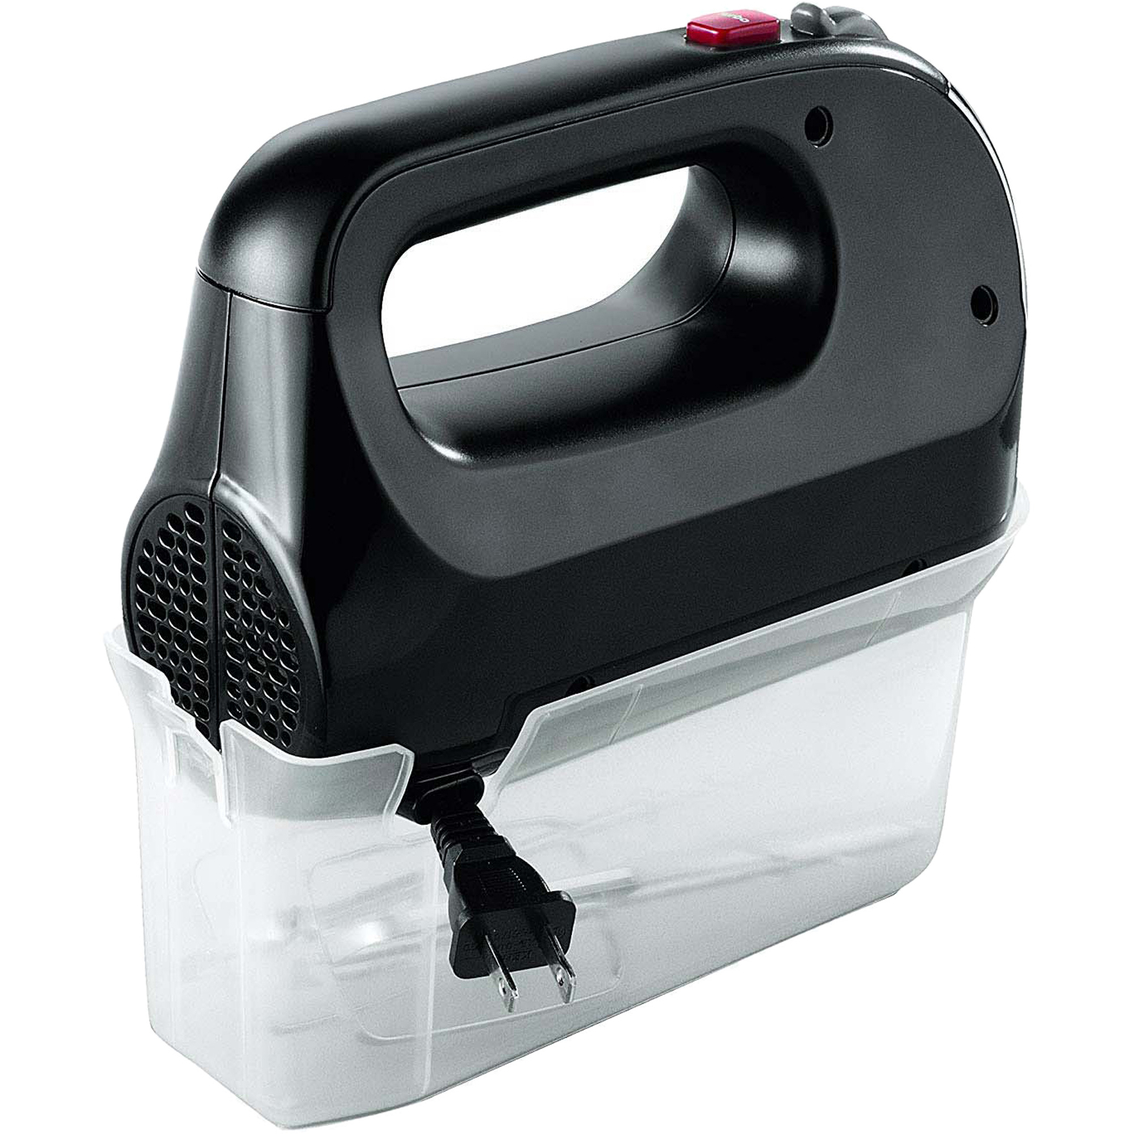 Oster 5 Speed Hand Mixer with Storage Case - Image 2 of 6